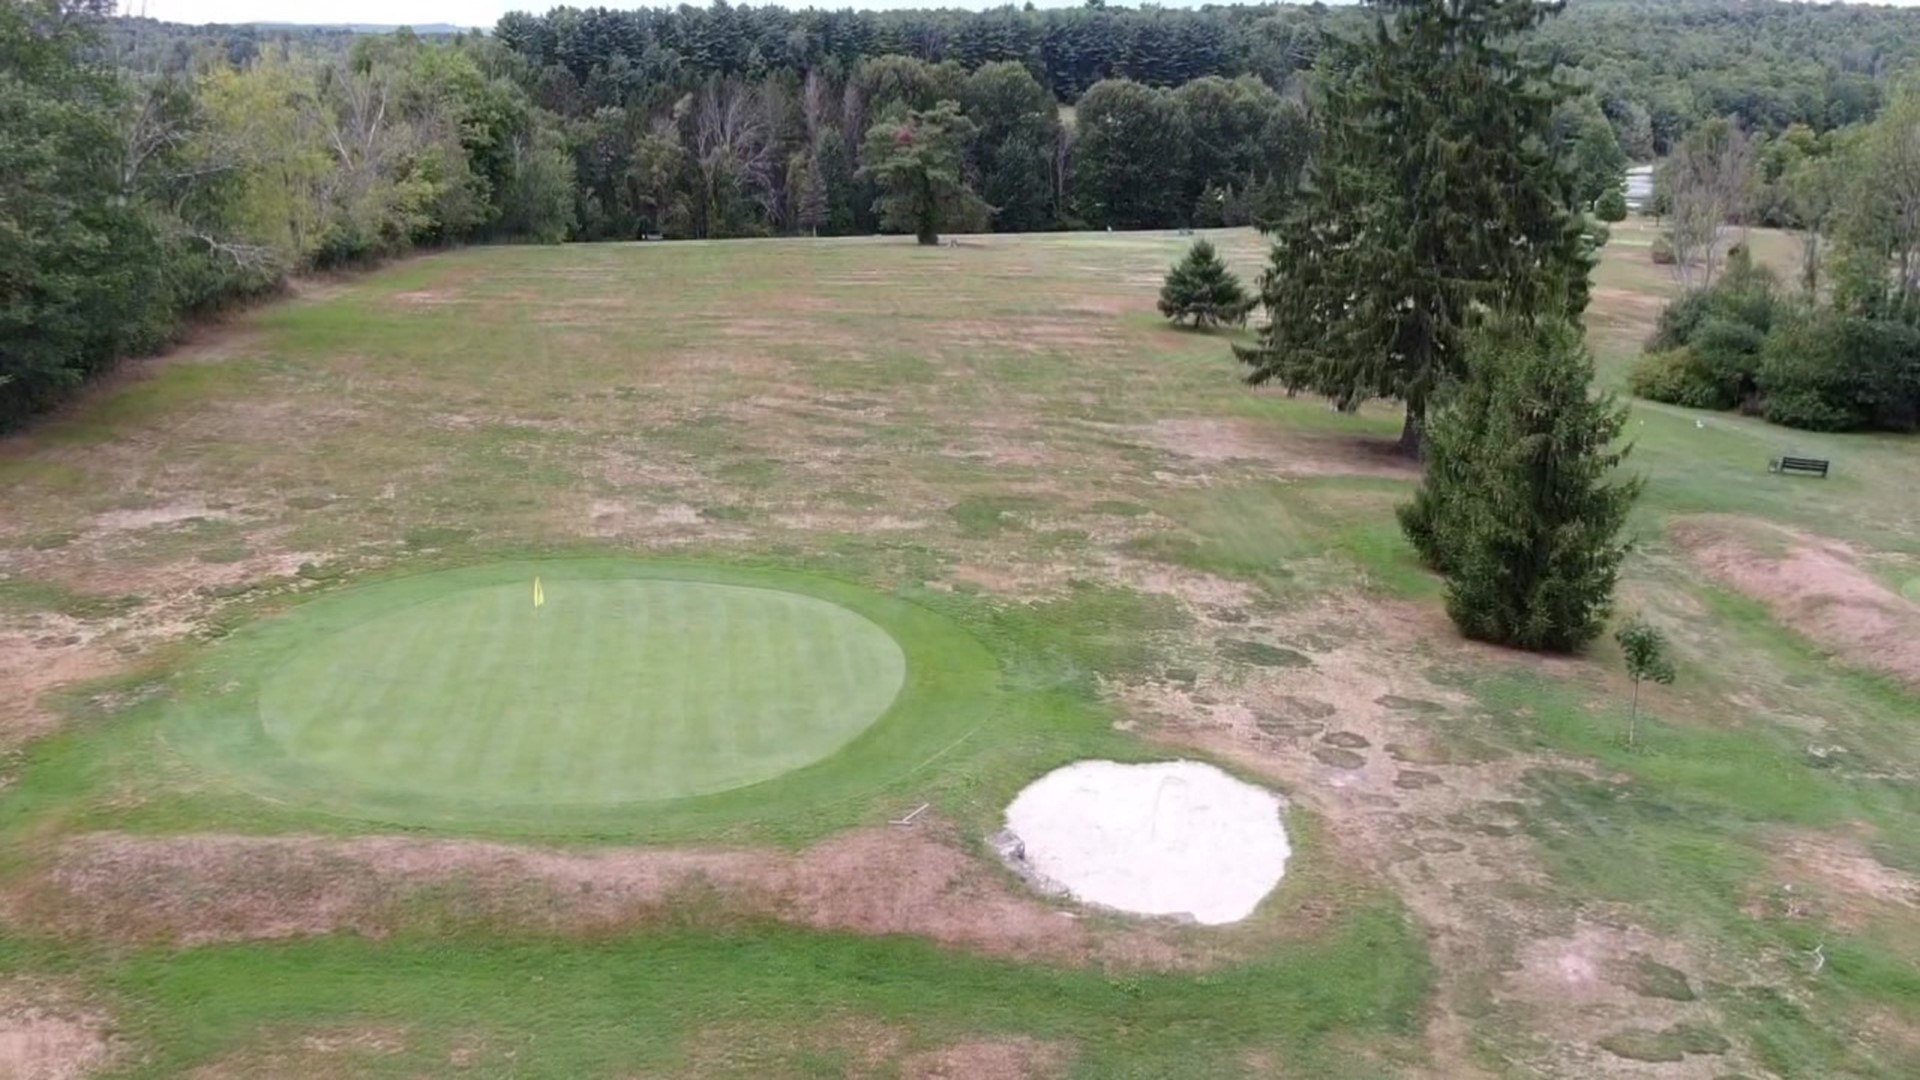 Golf is best played in warmer weather, but for maintenance crews, too much heat and too little rain can be a problem.